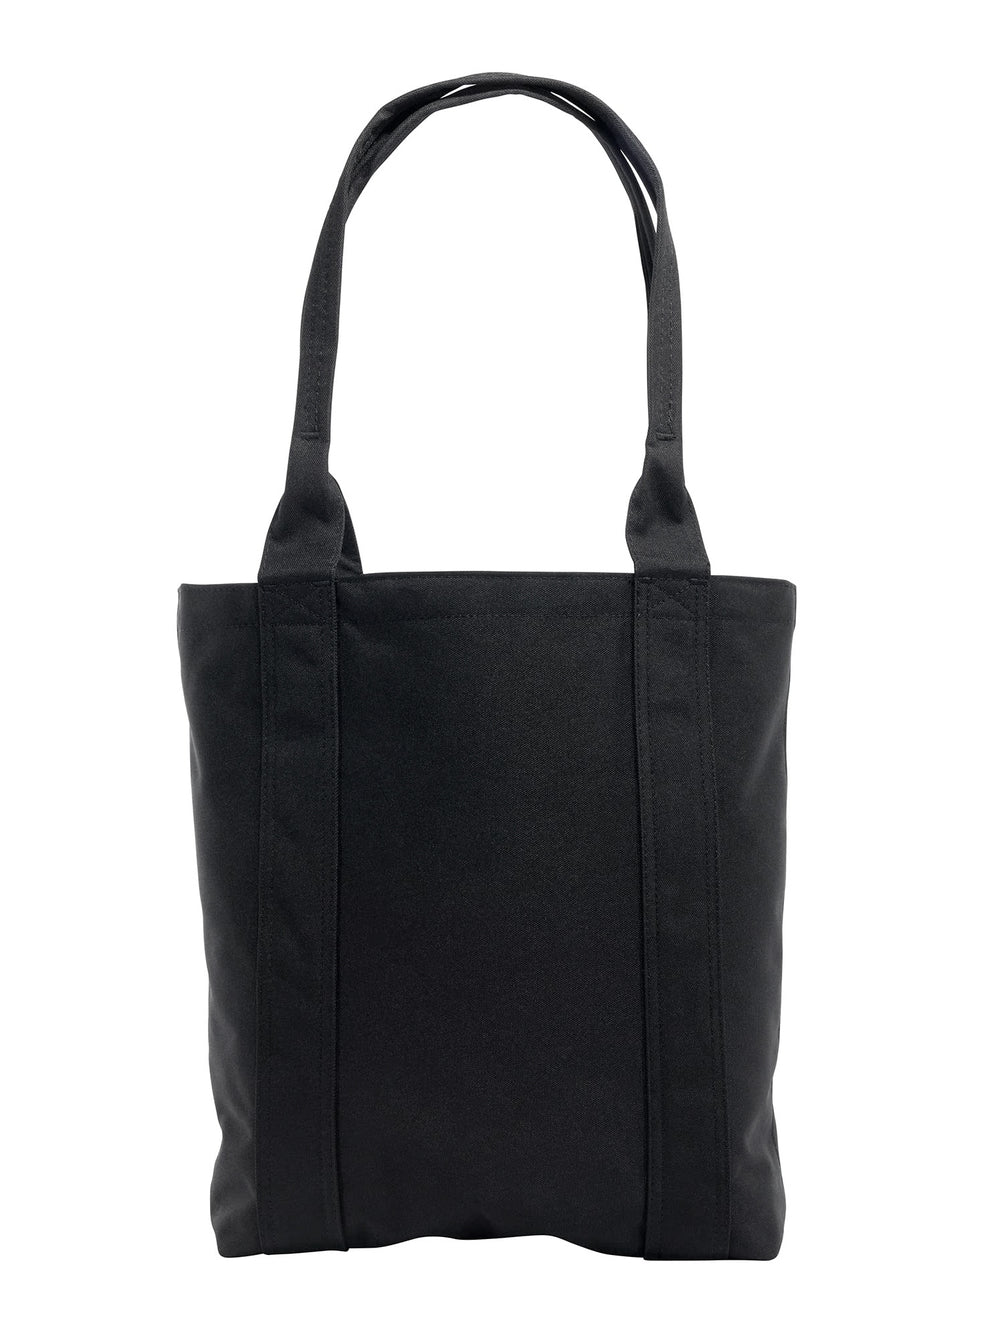 CARHARTT VERTICAL OPEN TOTE - CLEARANCE